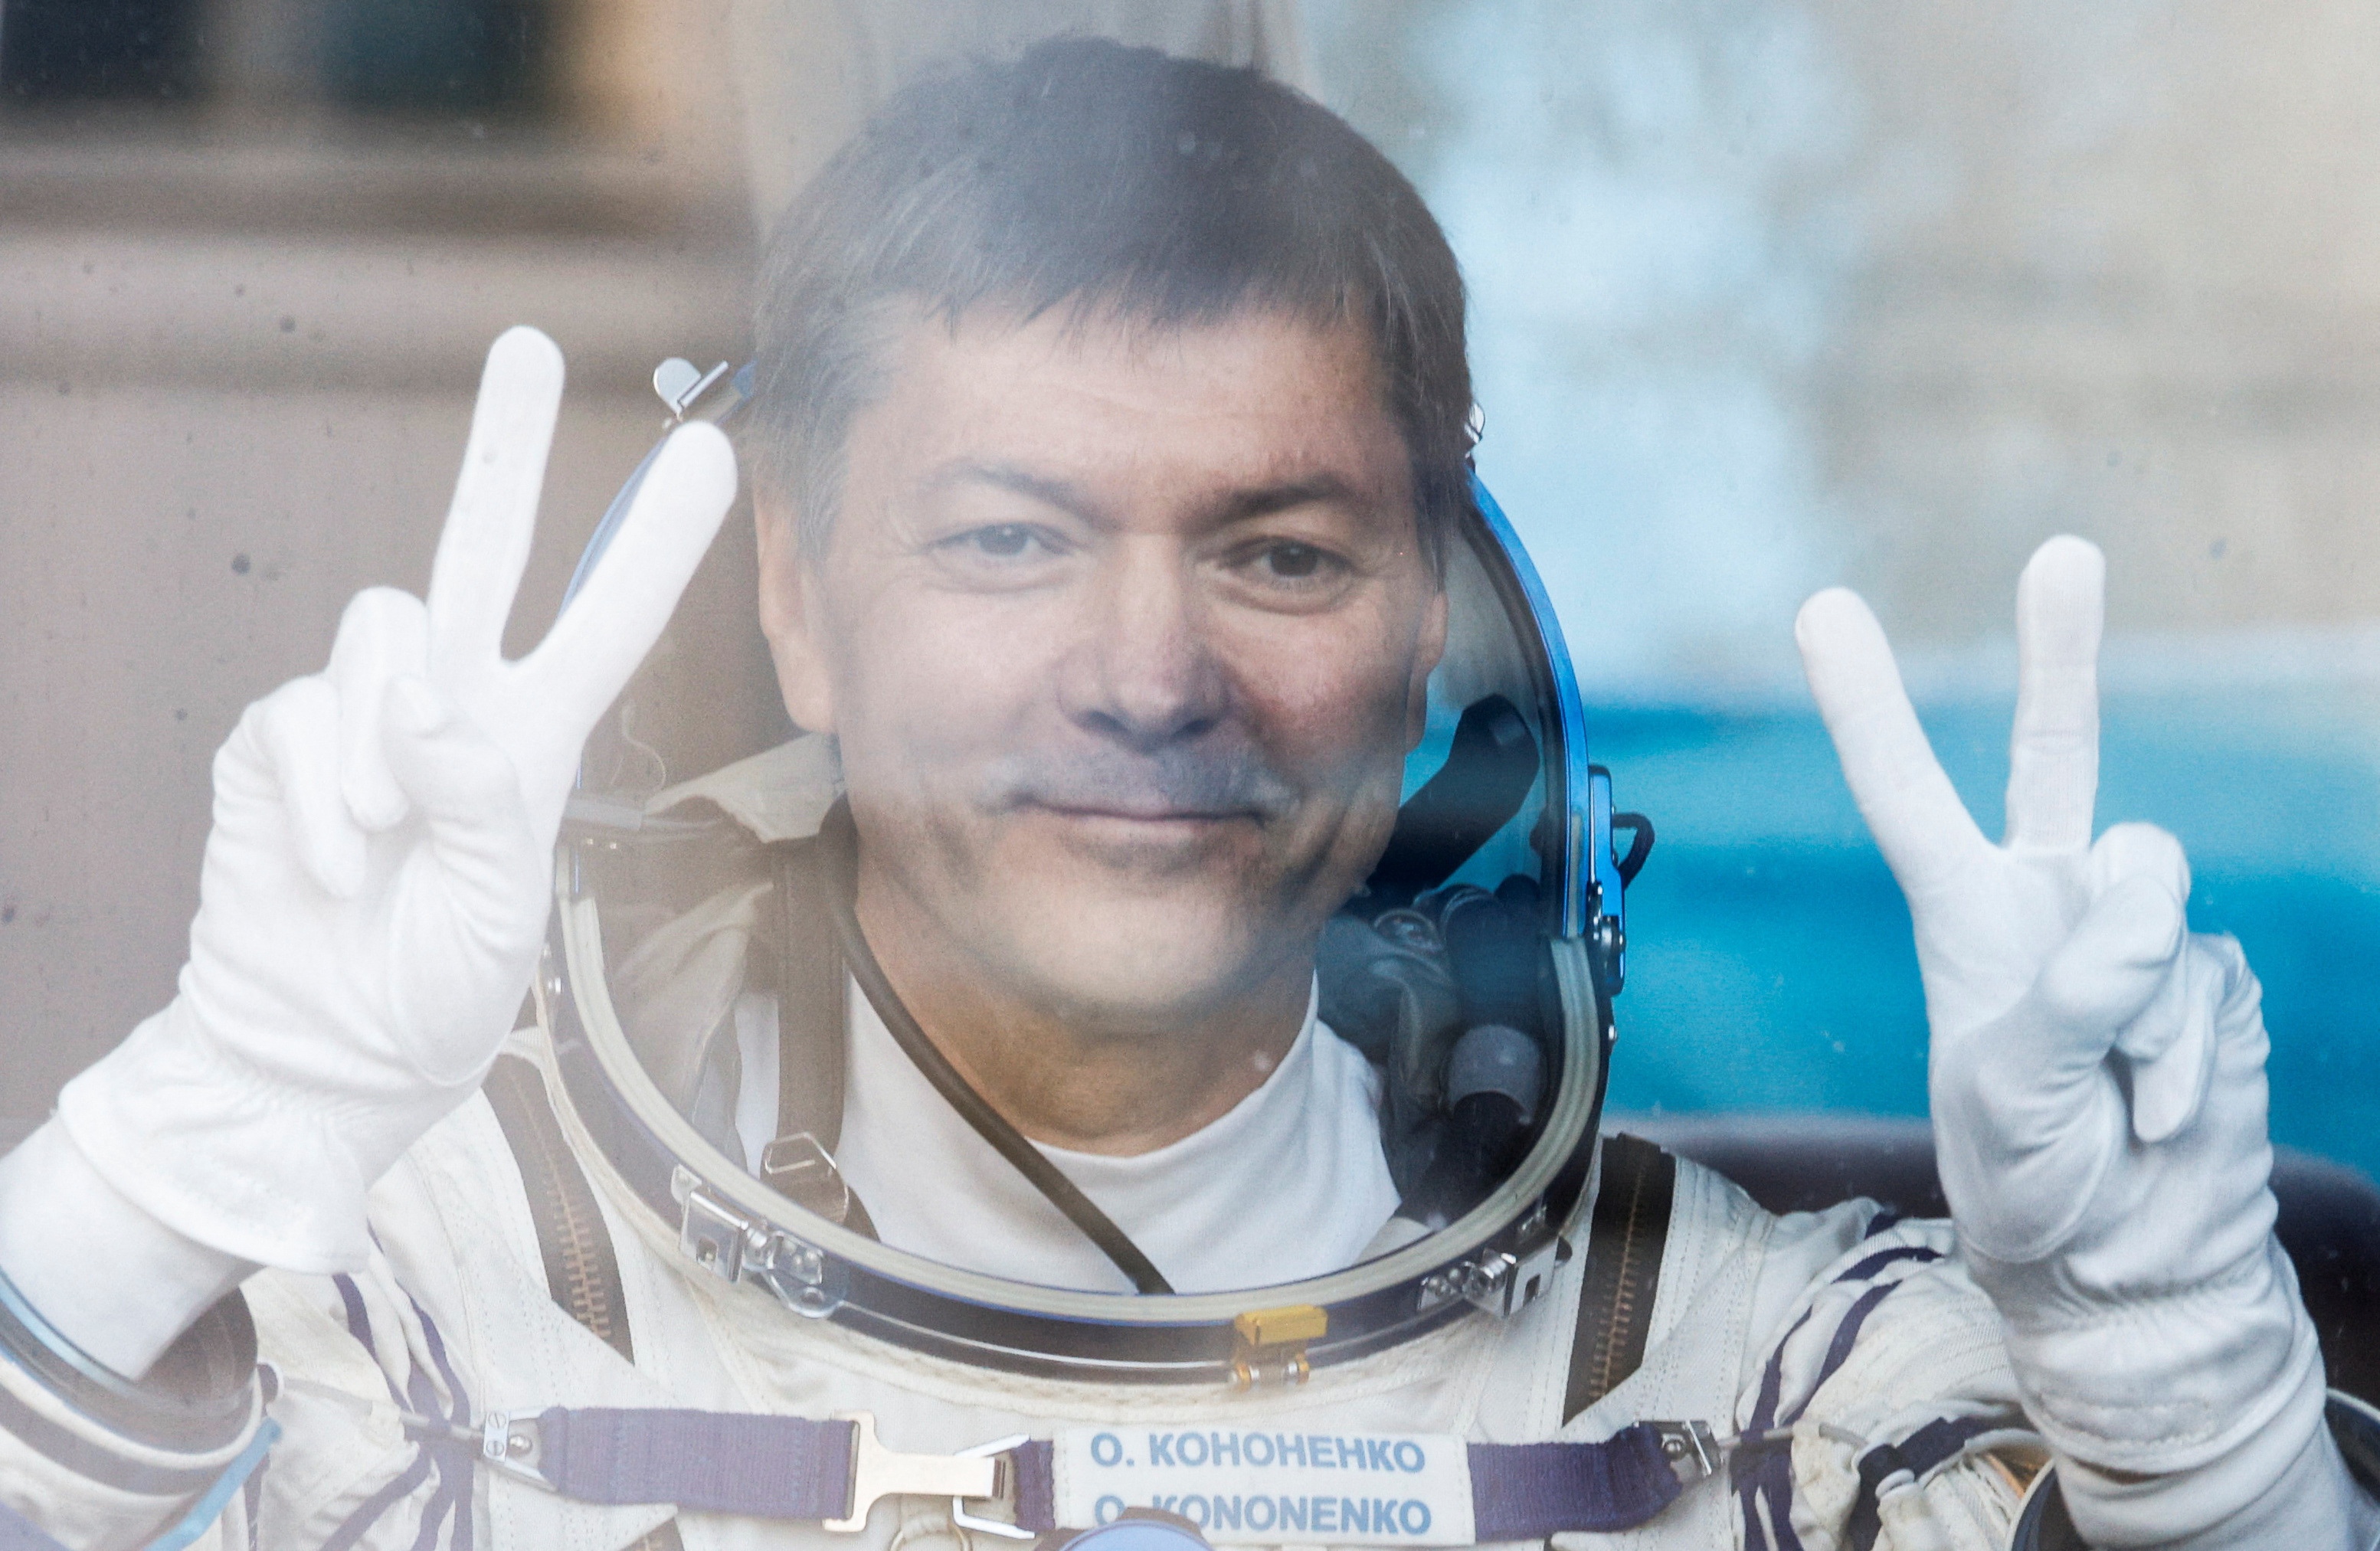 The Russian cosmonaut has been in space for more than 878 days